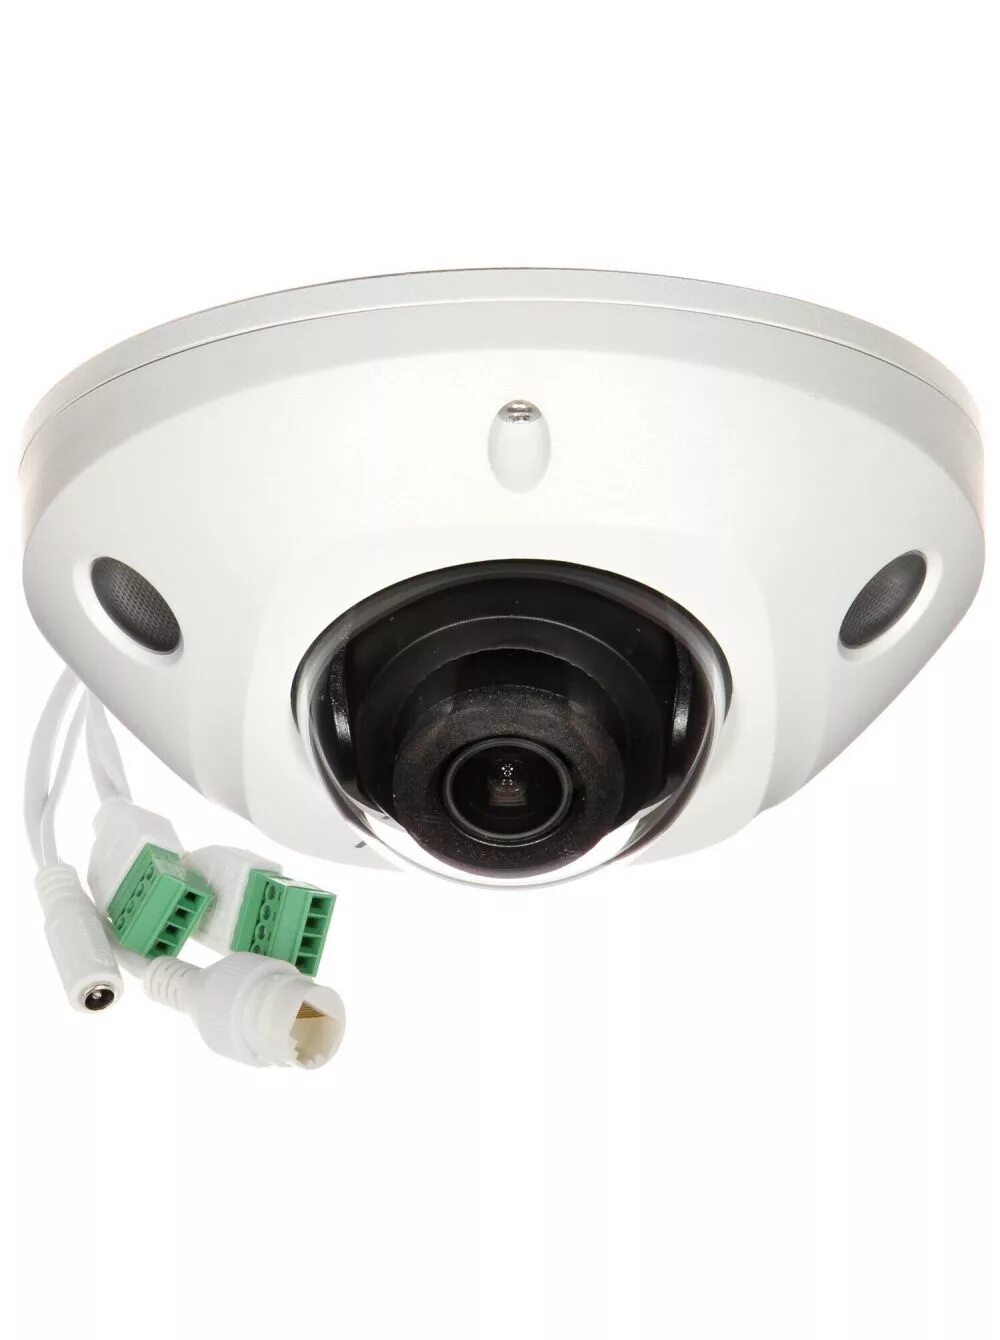 DS-2cd2543g0-IWS (2.8mm). Hikvision DS-2cd2523g0-is. Hikvision DS-2cd2543g0-IWS. Камера DS-2cd2523g0-is. Камеры хиквижн купить